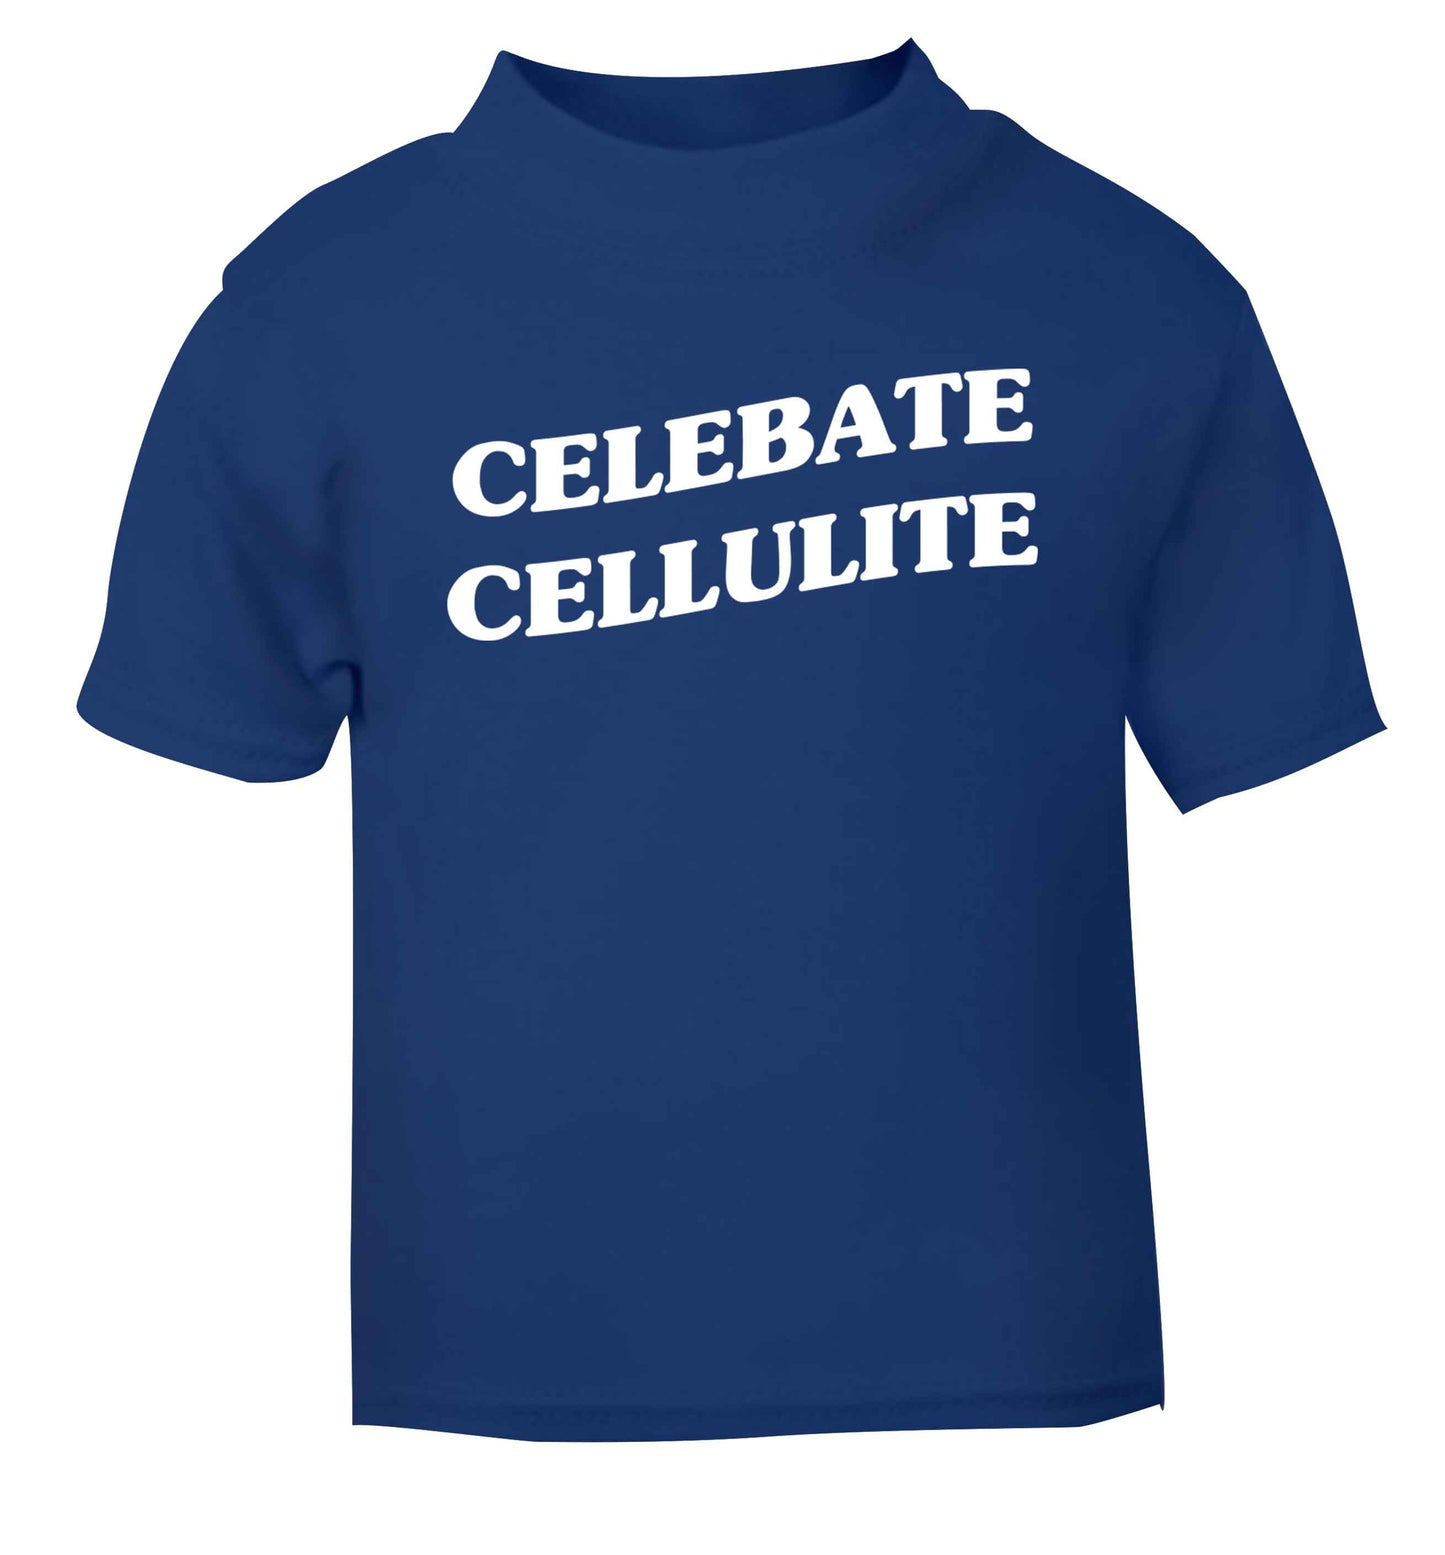 Celebrate cellulite blue baby toddler Tshirt 2 Years